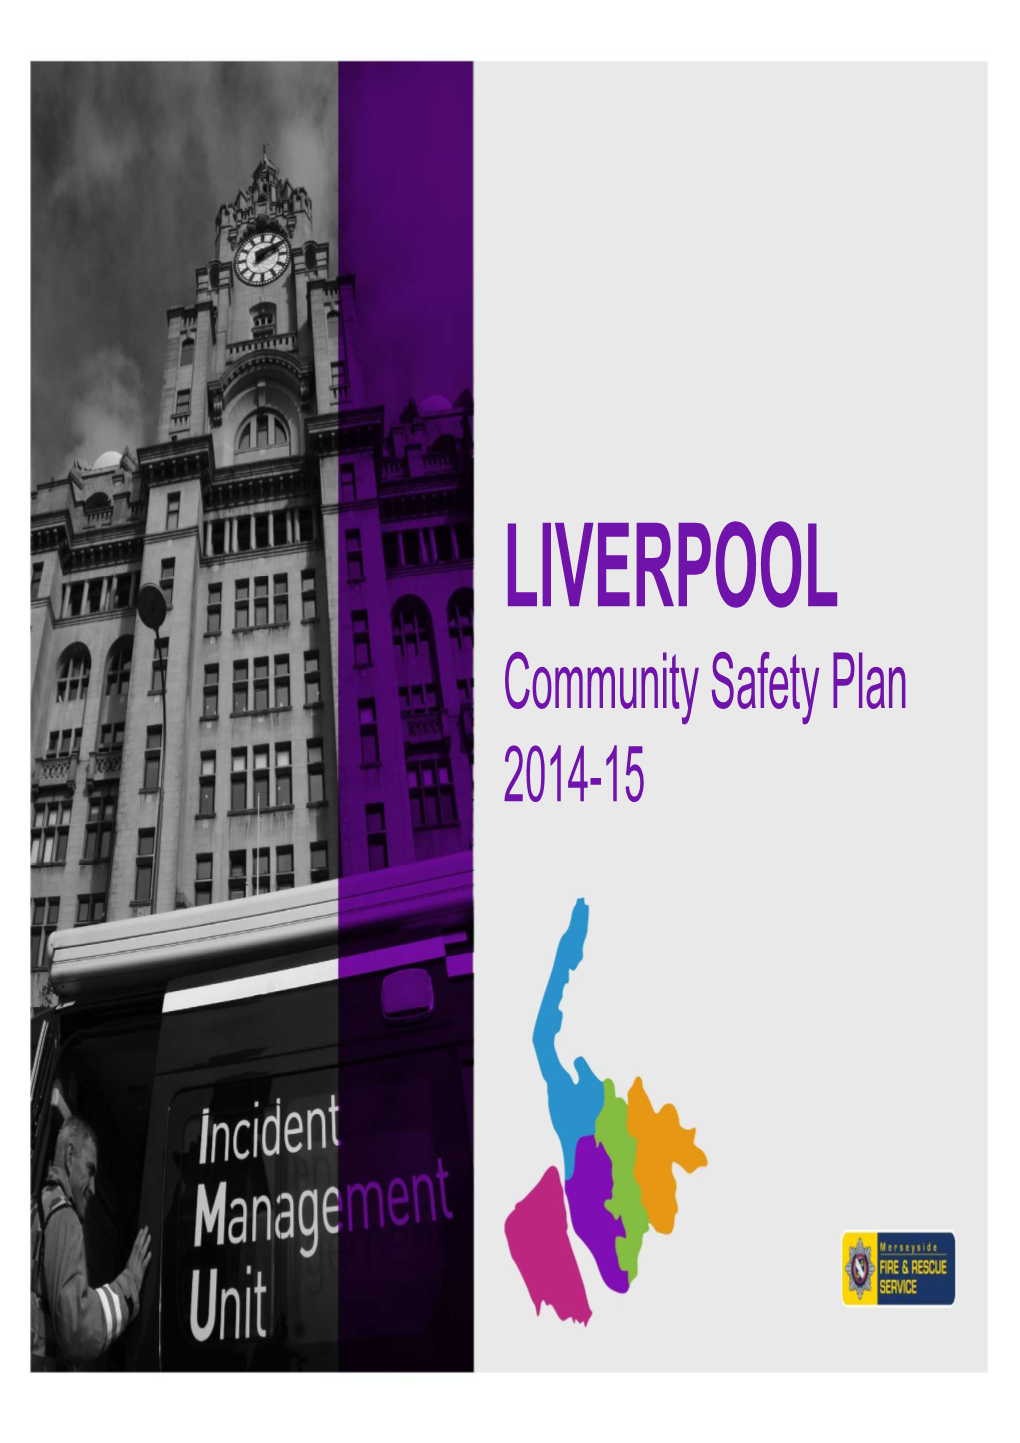 LIVERPOOL Community Safety Plan 2014-15 Introduction by the Liverpool District Manager Richie Davis